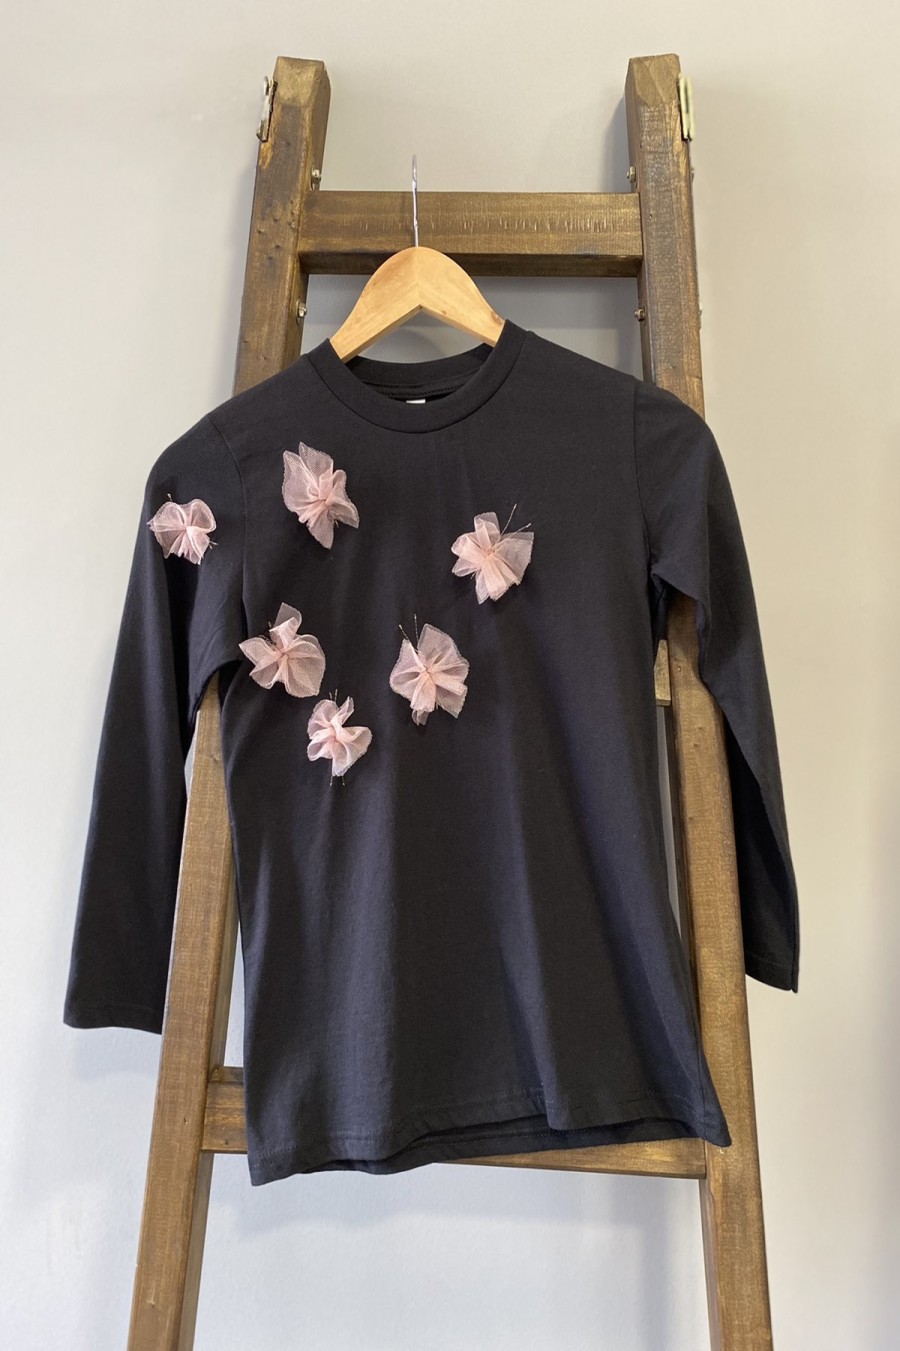 Long-sleeved t-shirt with tulle butterflies